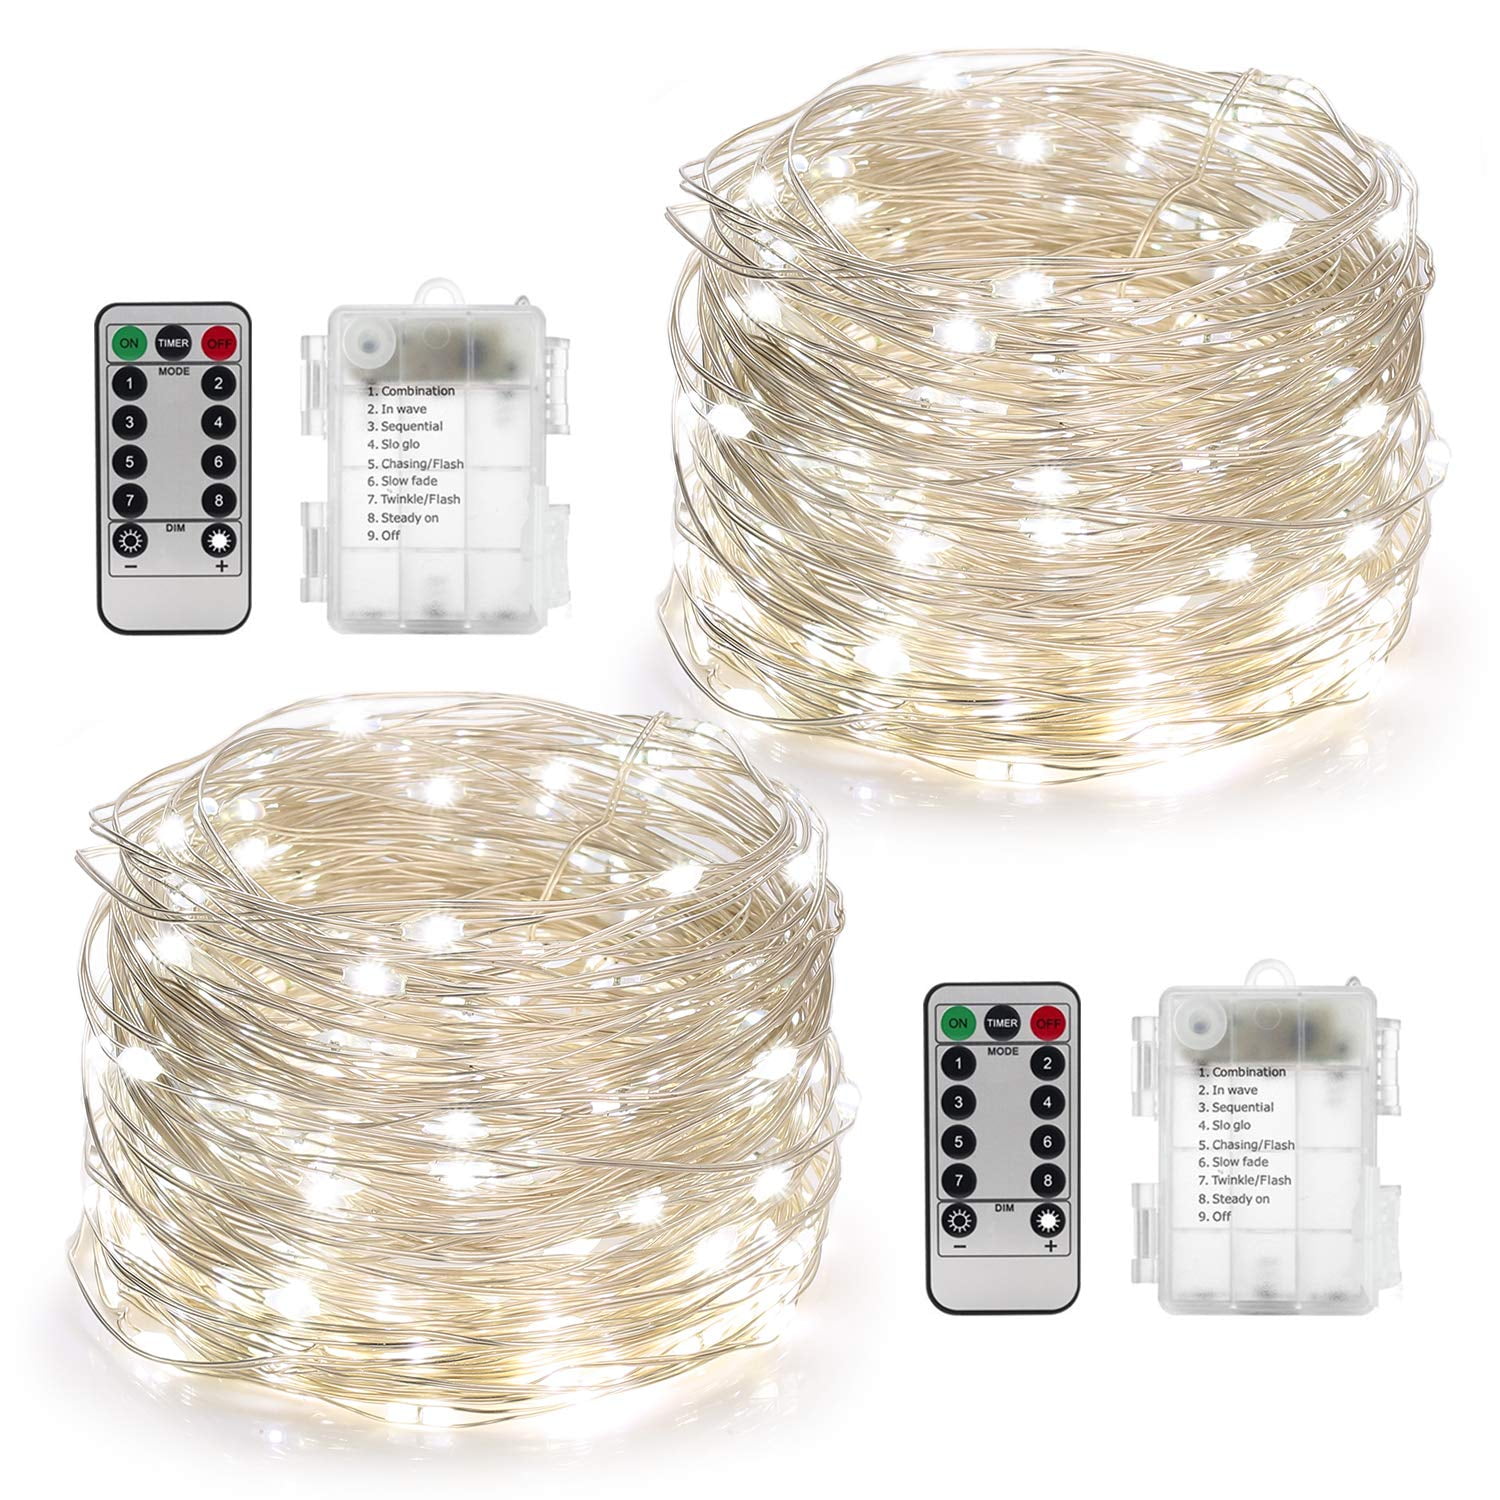 20-100LED Battery Power LED Copper Wire String Fairy Light Strip Lamp Xmas Party 